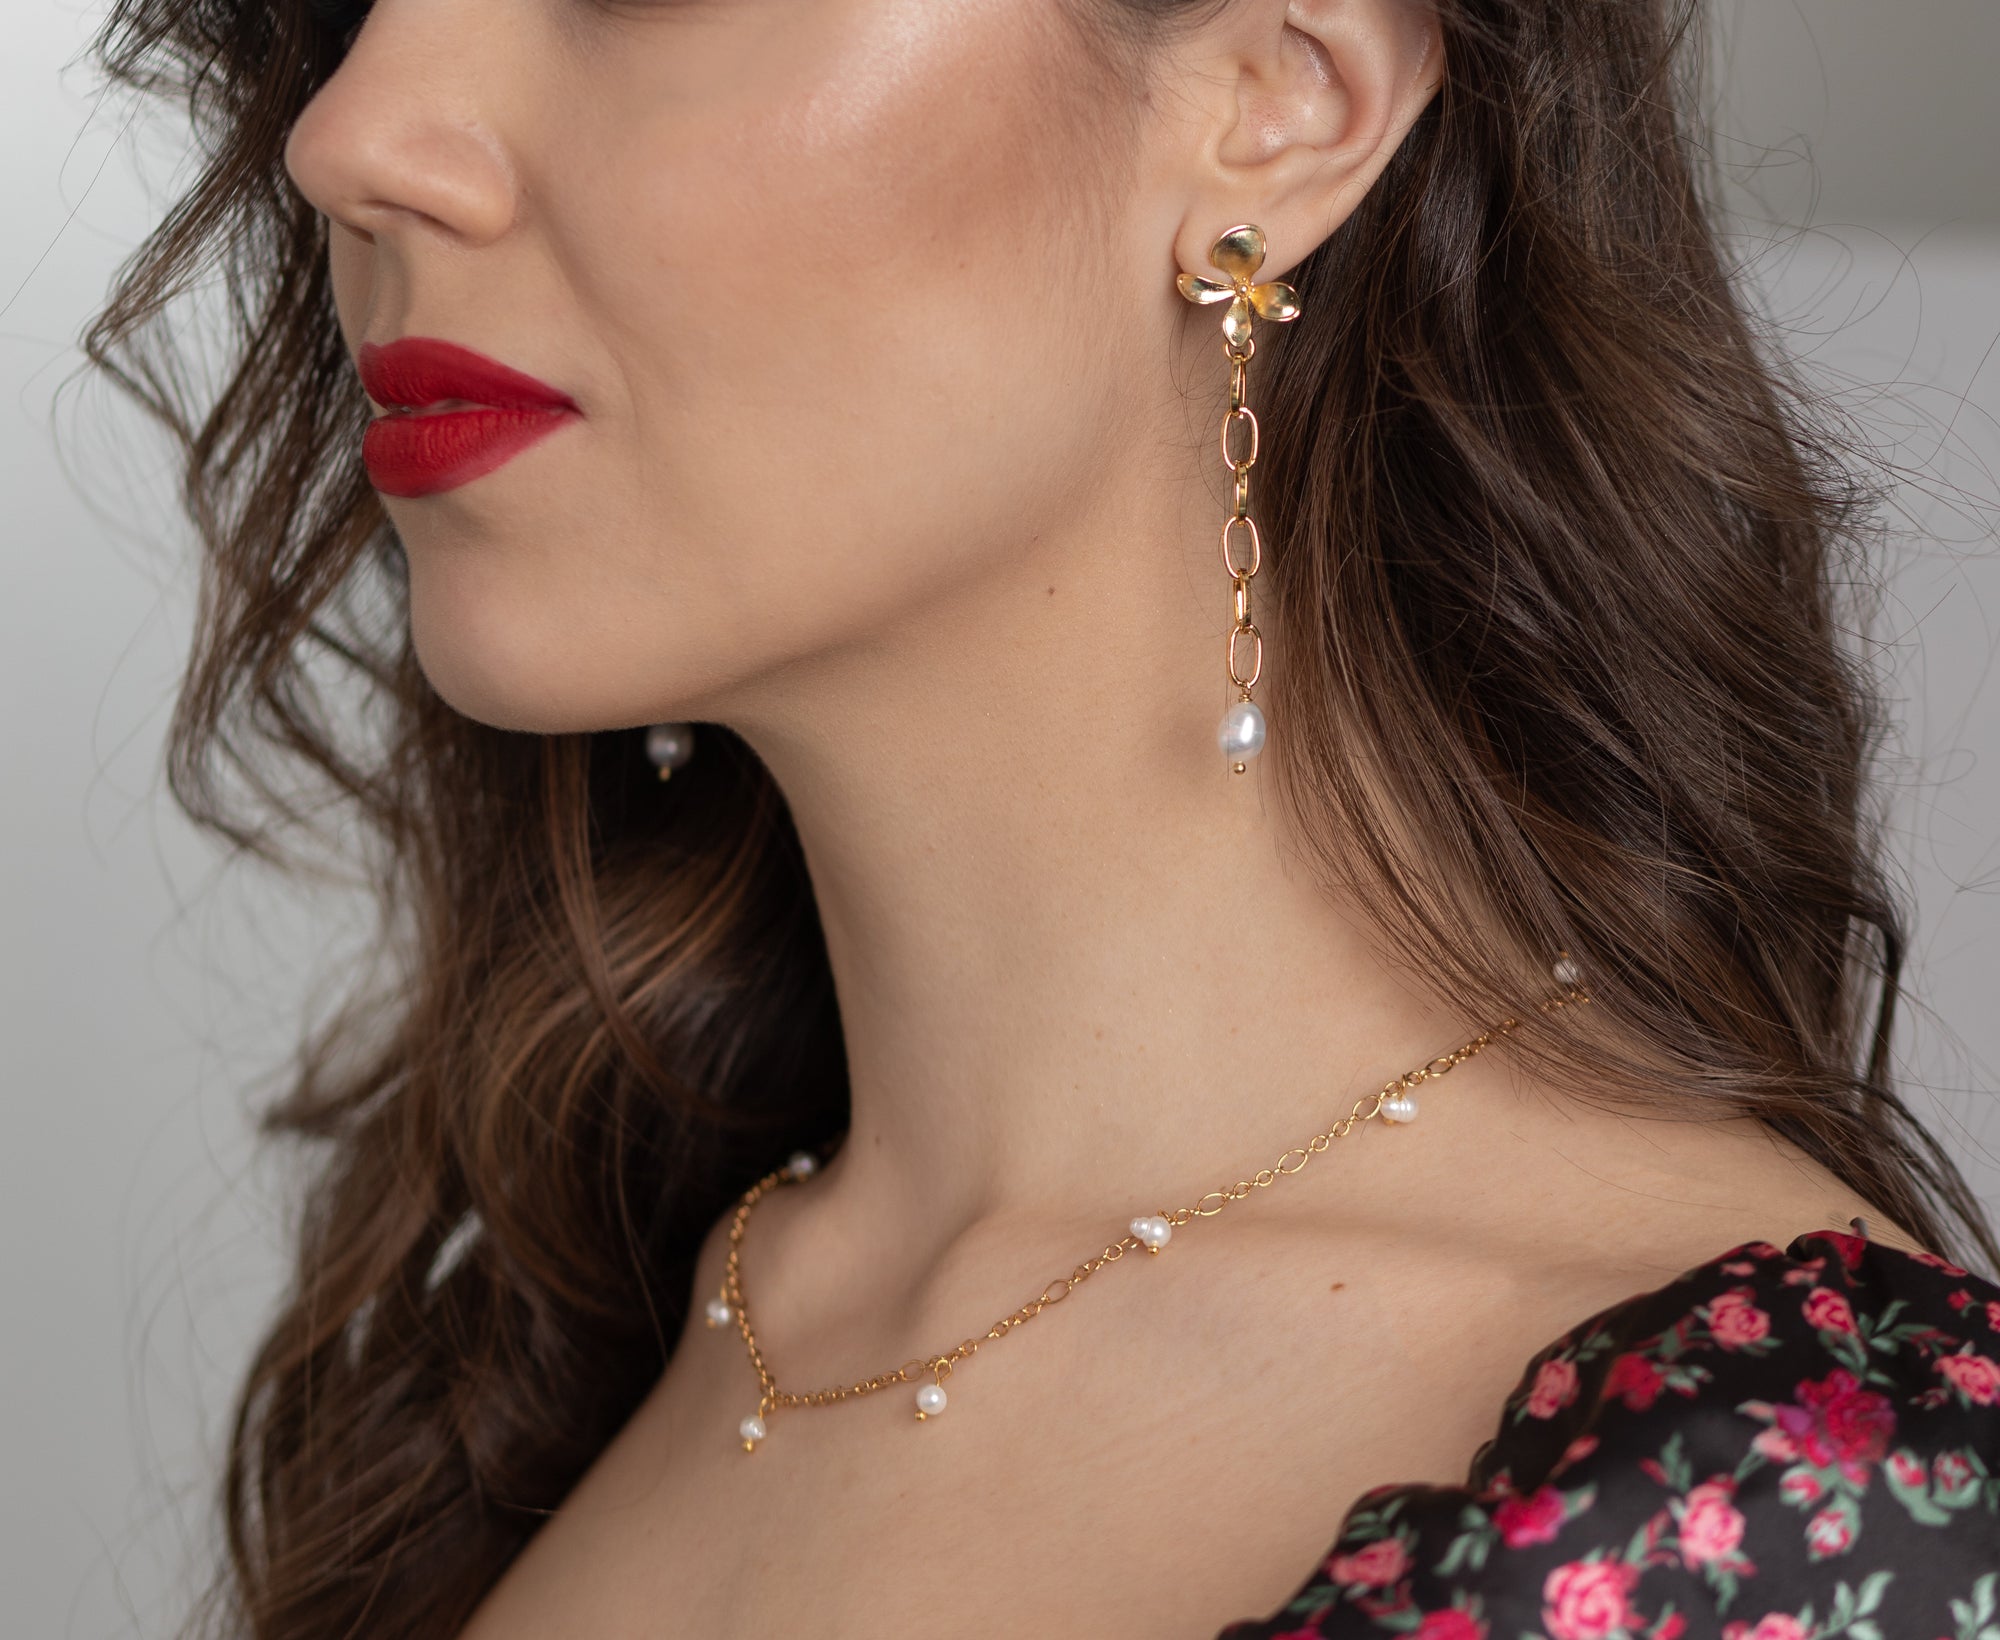 Leilani Gold Pearl Drop Earrings - Standout Boutique